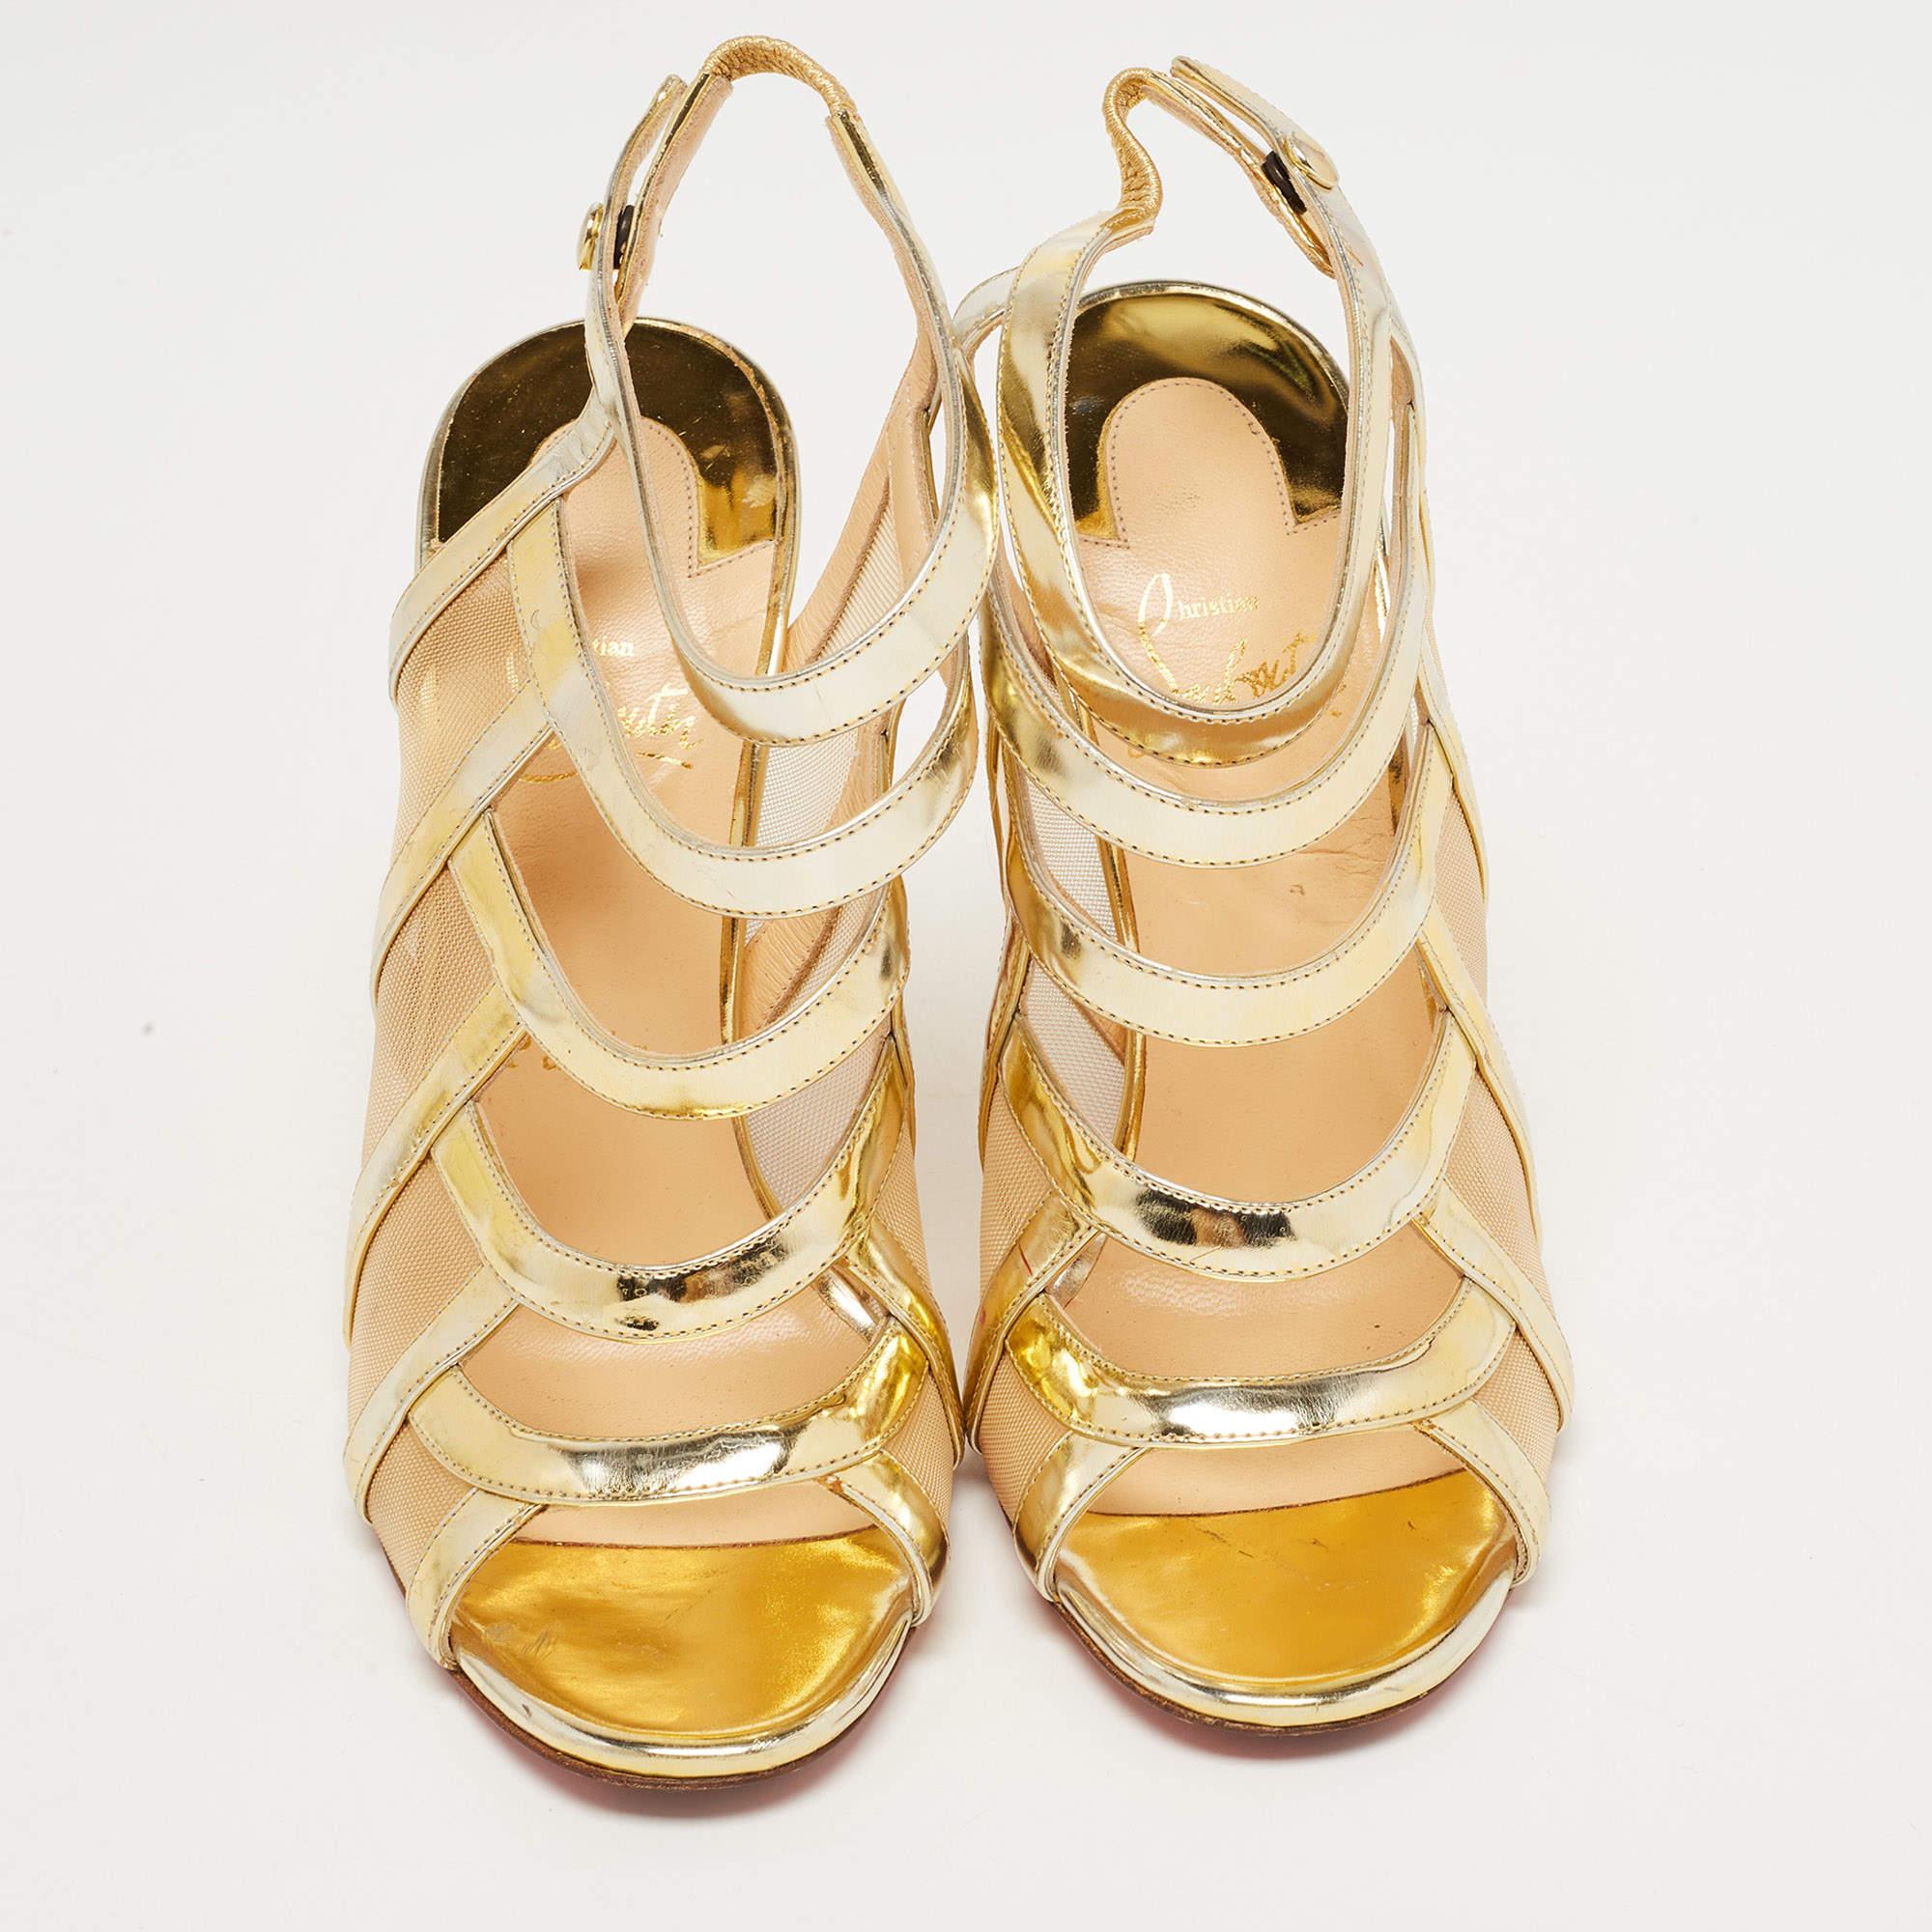 These sandals will offer you both luxury and comfort. Made from quality materials, they come in a versatile shade and are equipped with comfortable insoles.

